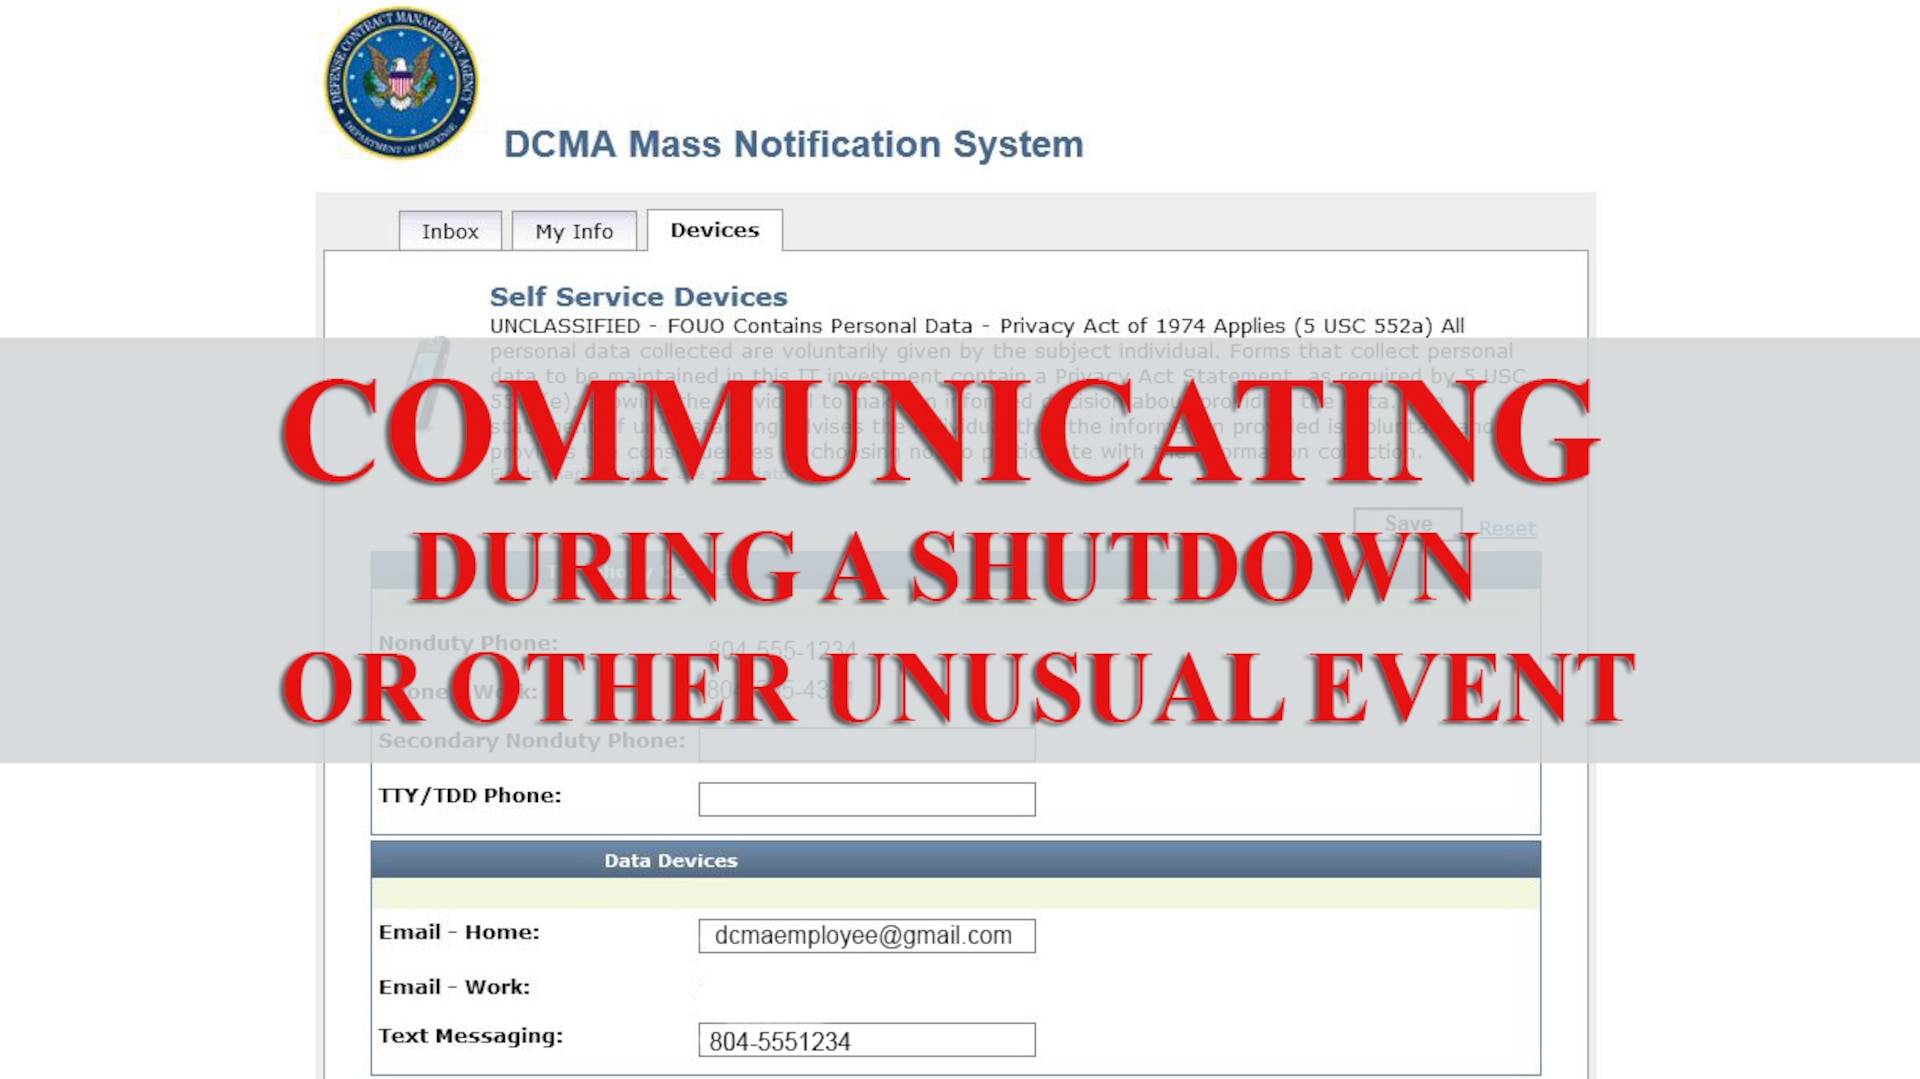 Employees are encouraged to familiarize themselves with the various channels the Defense Contract Management Agency uses for communication outside of the normal work-week processes. These are important tools that have shown effectiveness in the past year during the hurricane evacuations and shutdown.